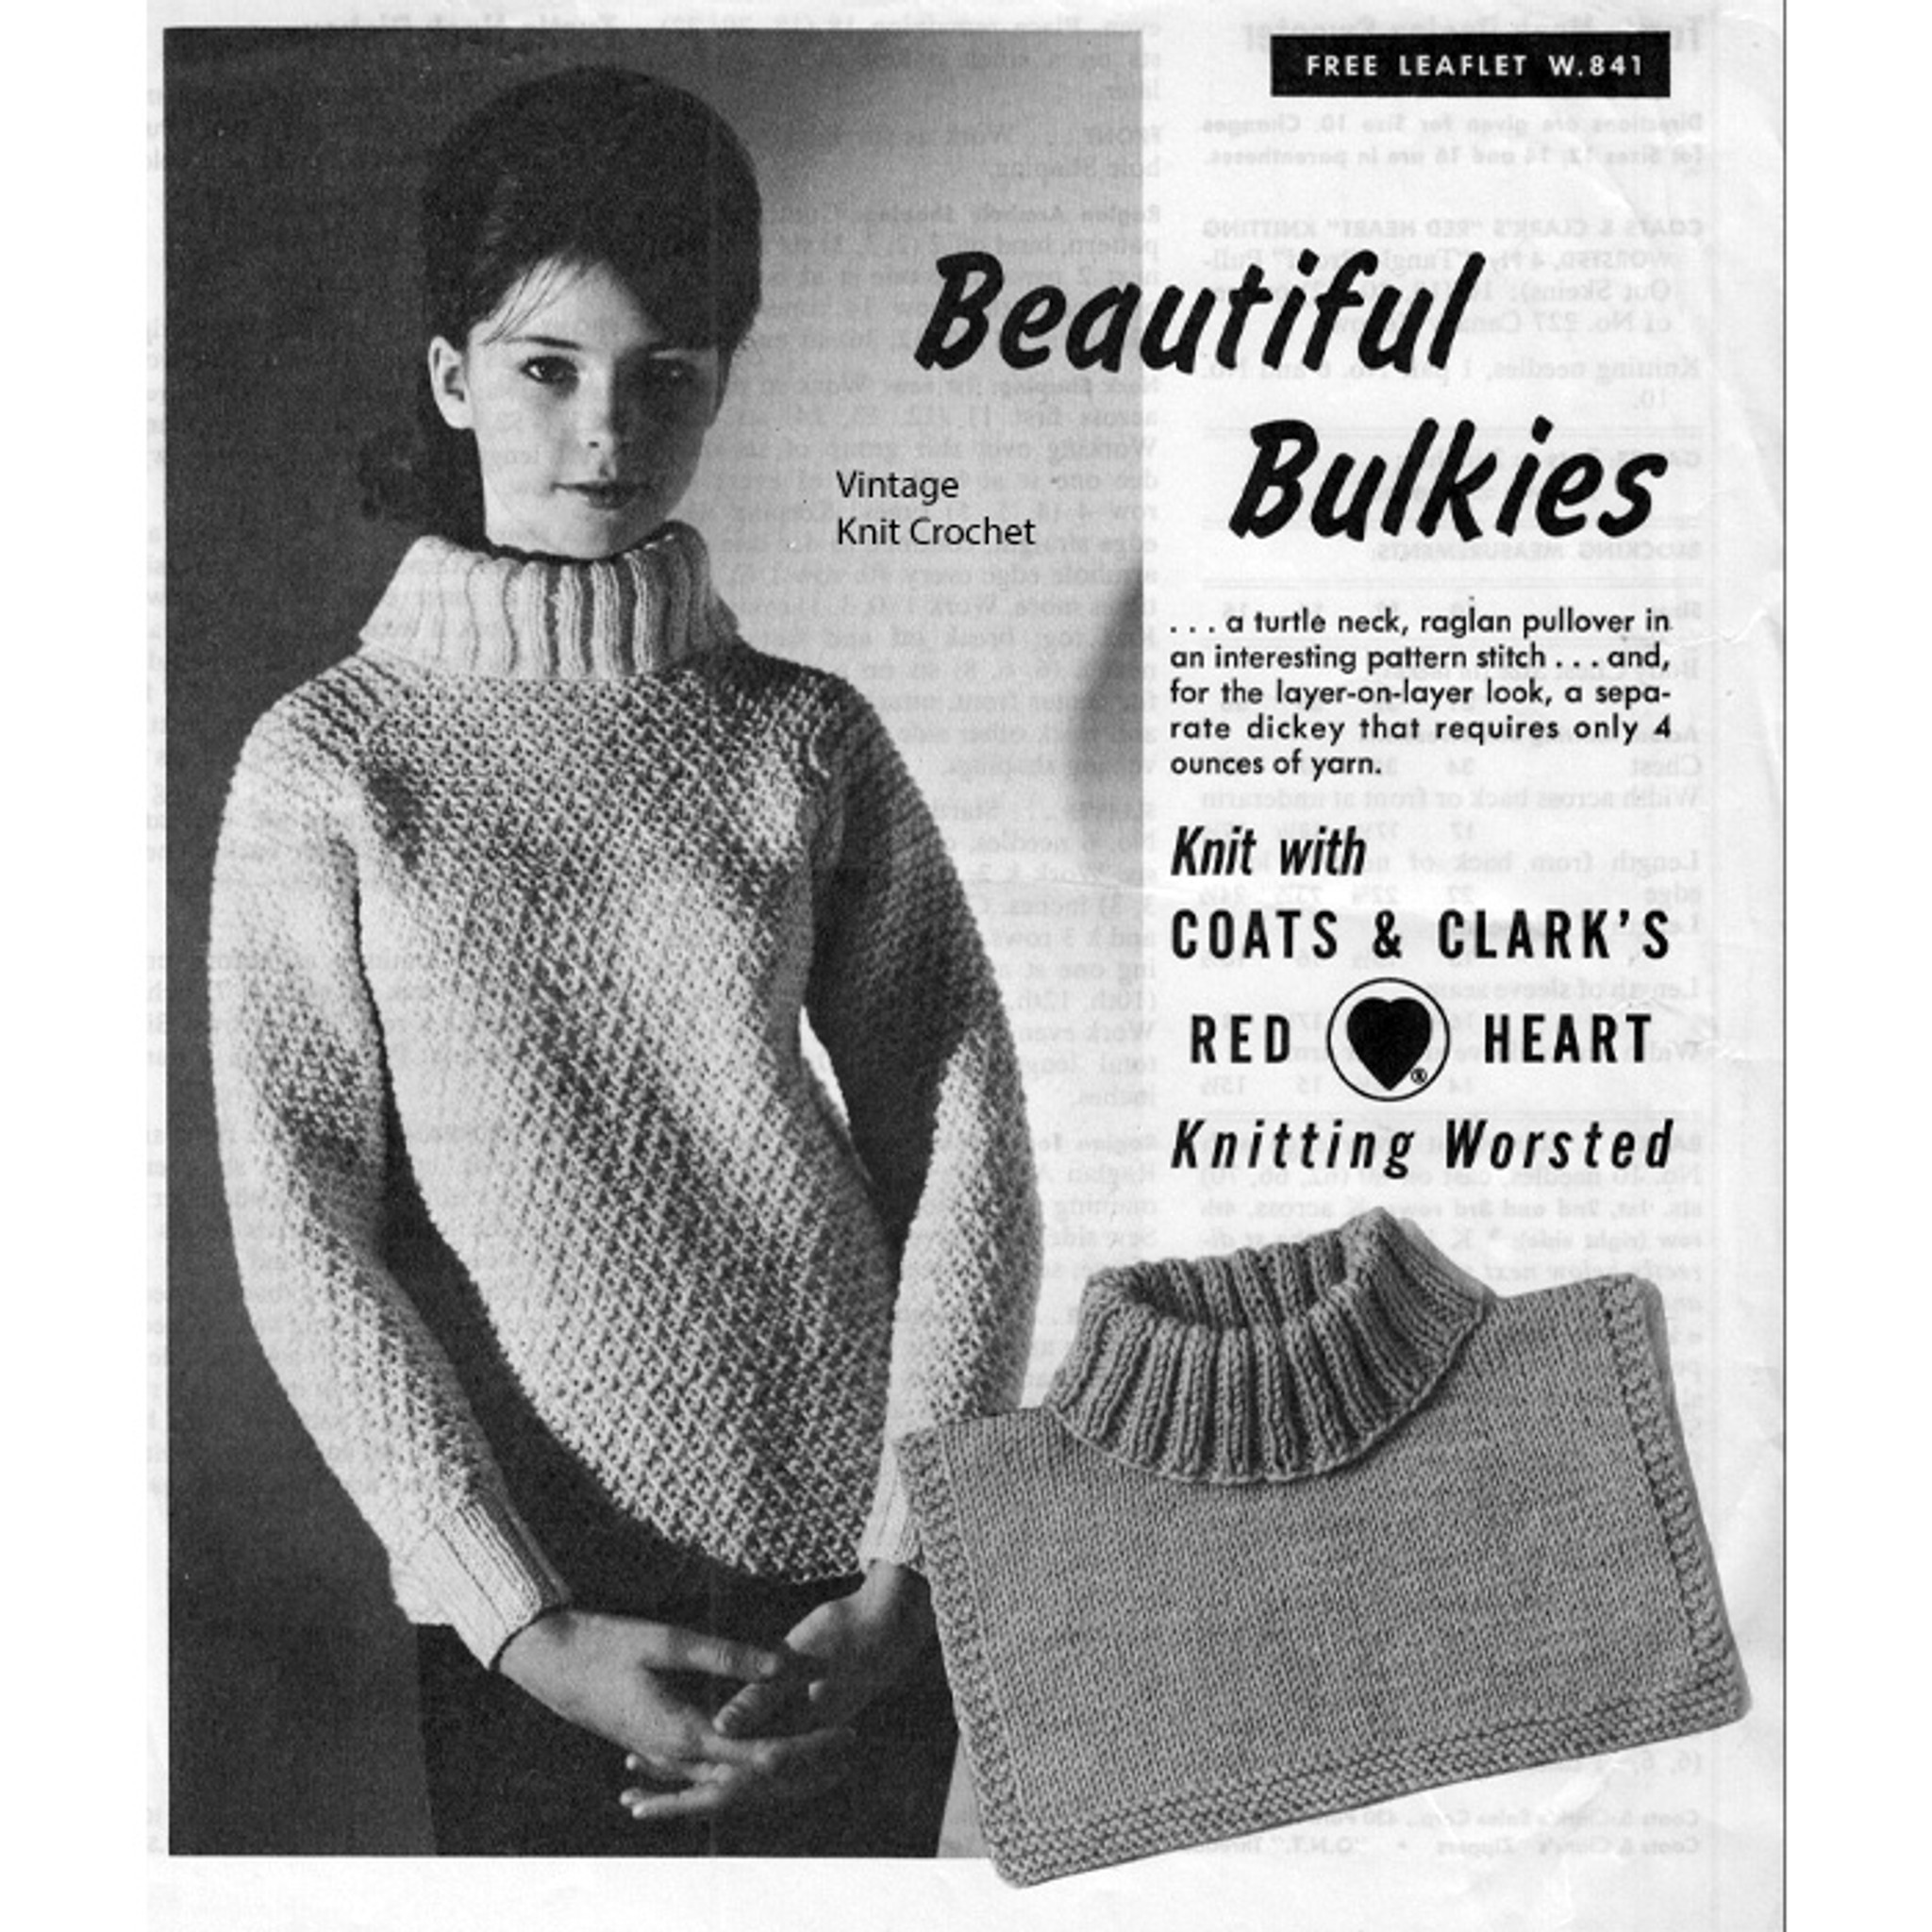 Knitted Cowl Neck Bulky Sweater Pattern